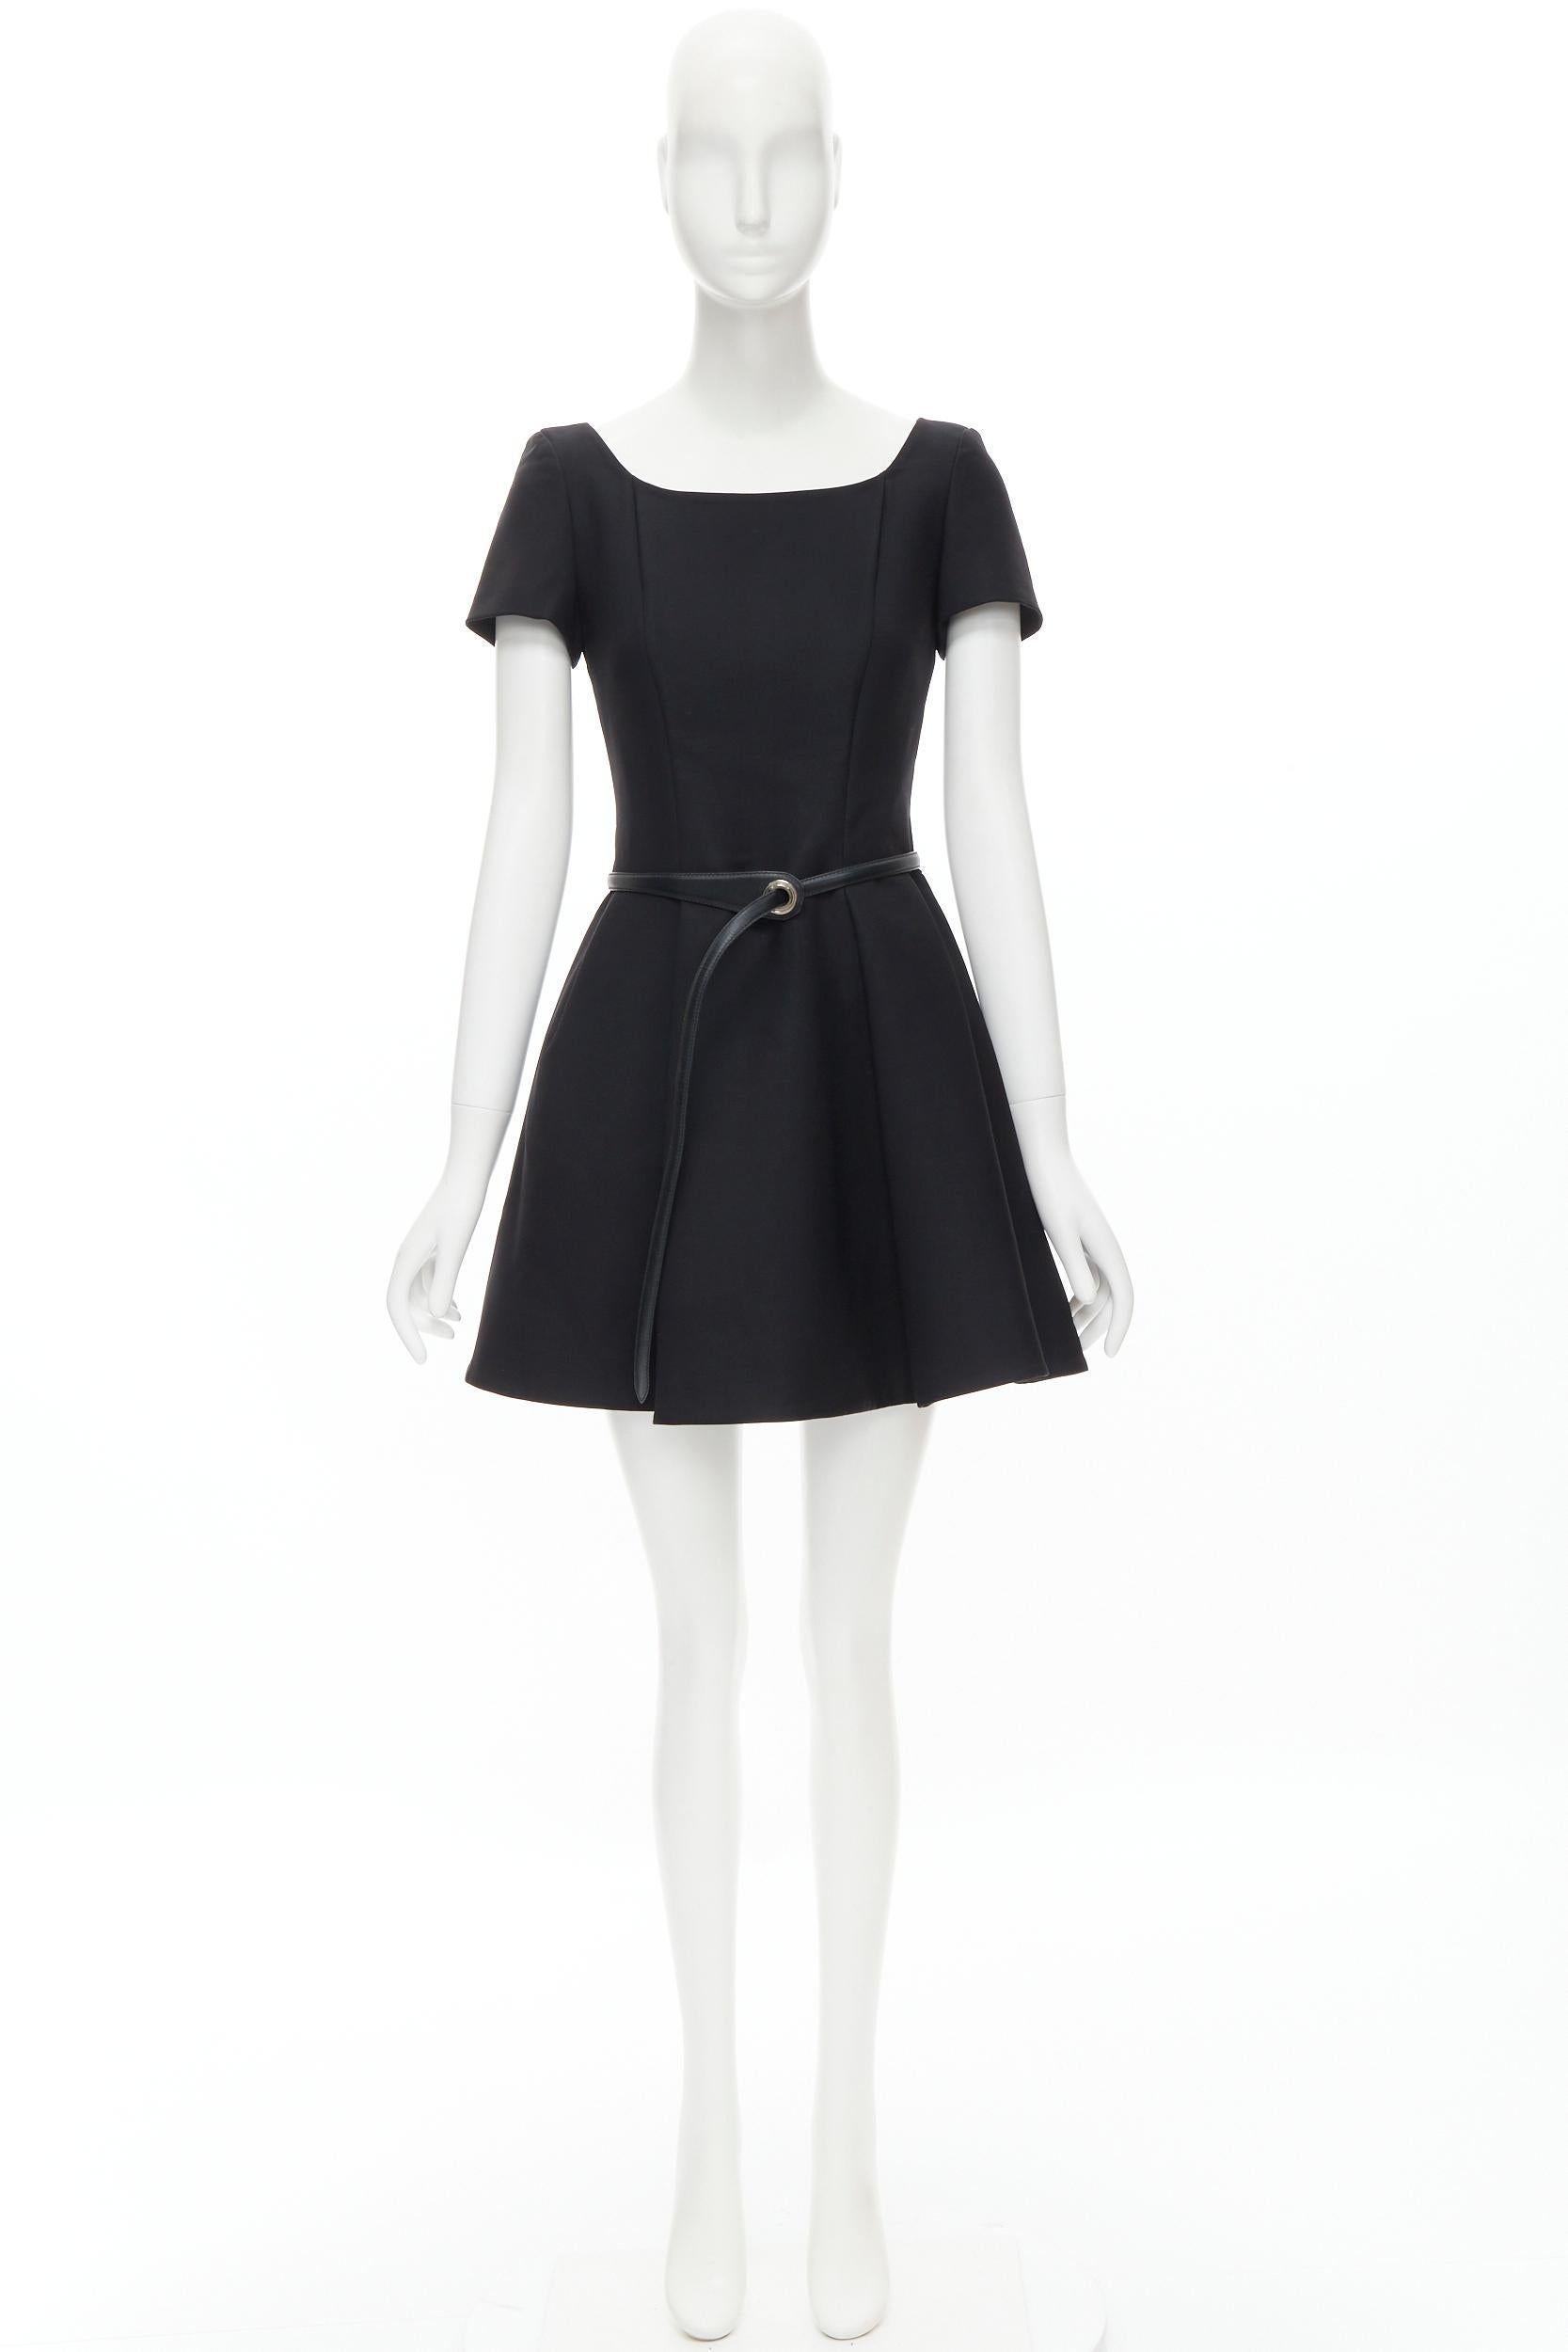 CHRISTIAN DIOR black wool pinched seam leather belt fit flare dress  FR36 S 6